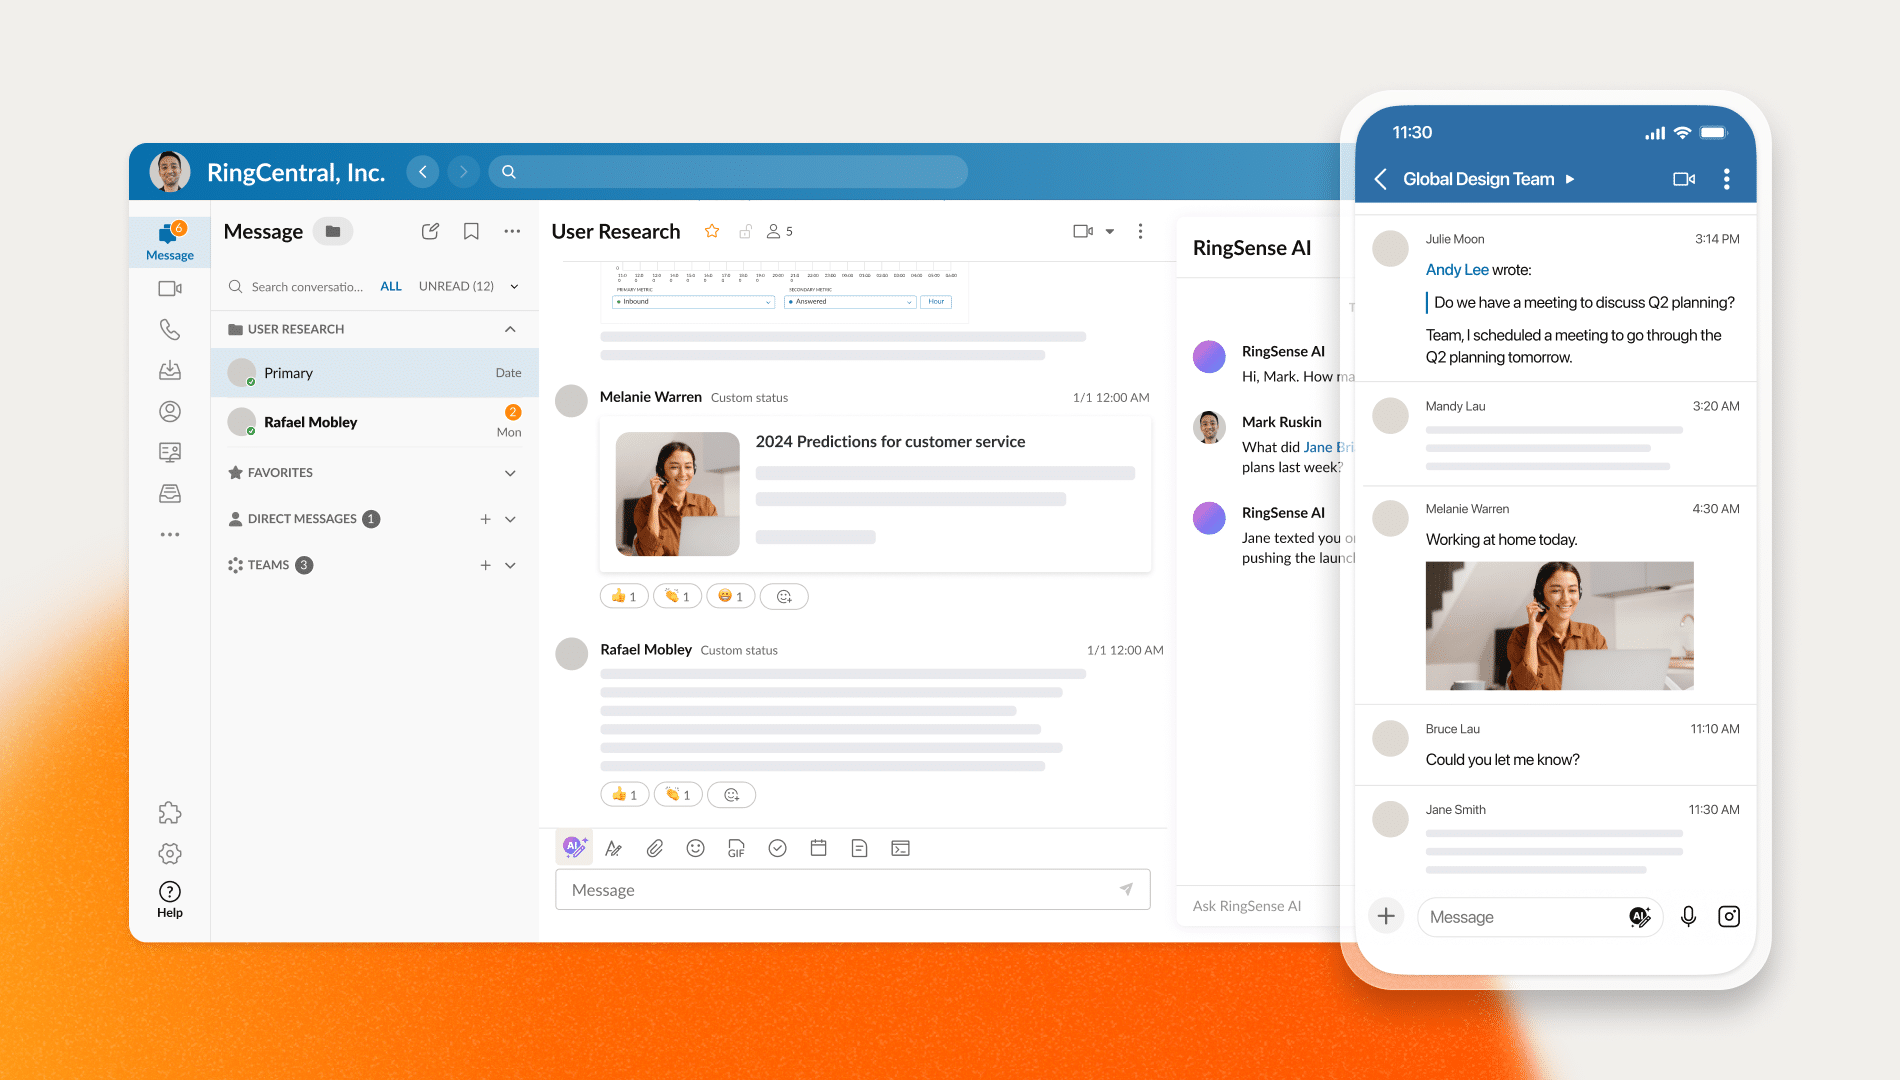 Team messaging within the RingCentral app